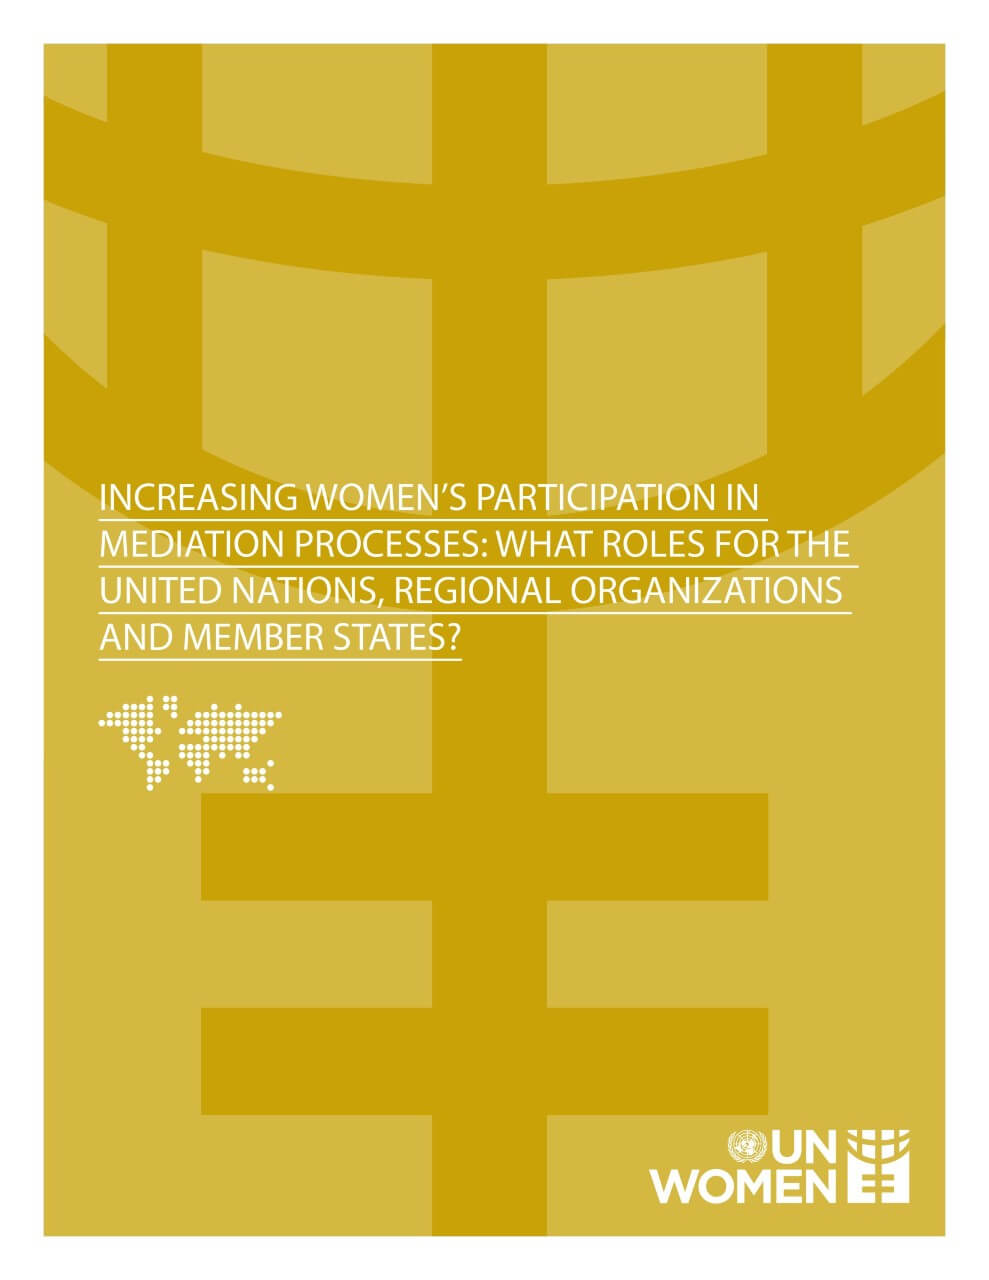 Increasing women’s participation in mediation processes: What roles for the United Nations, regional organizations, and Member States?